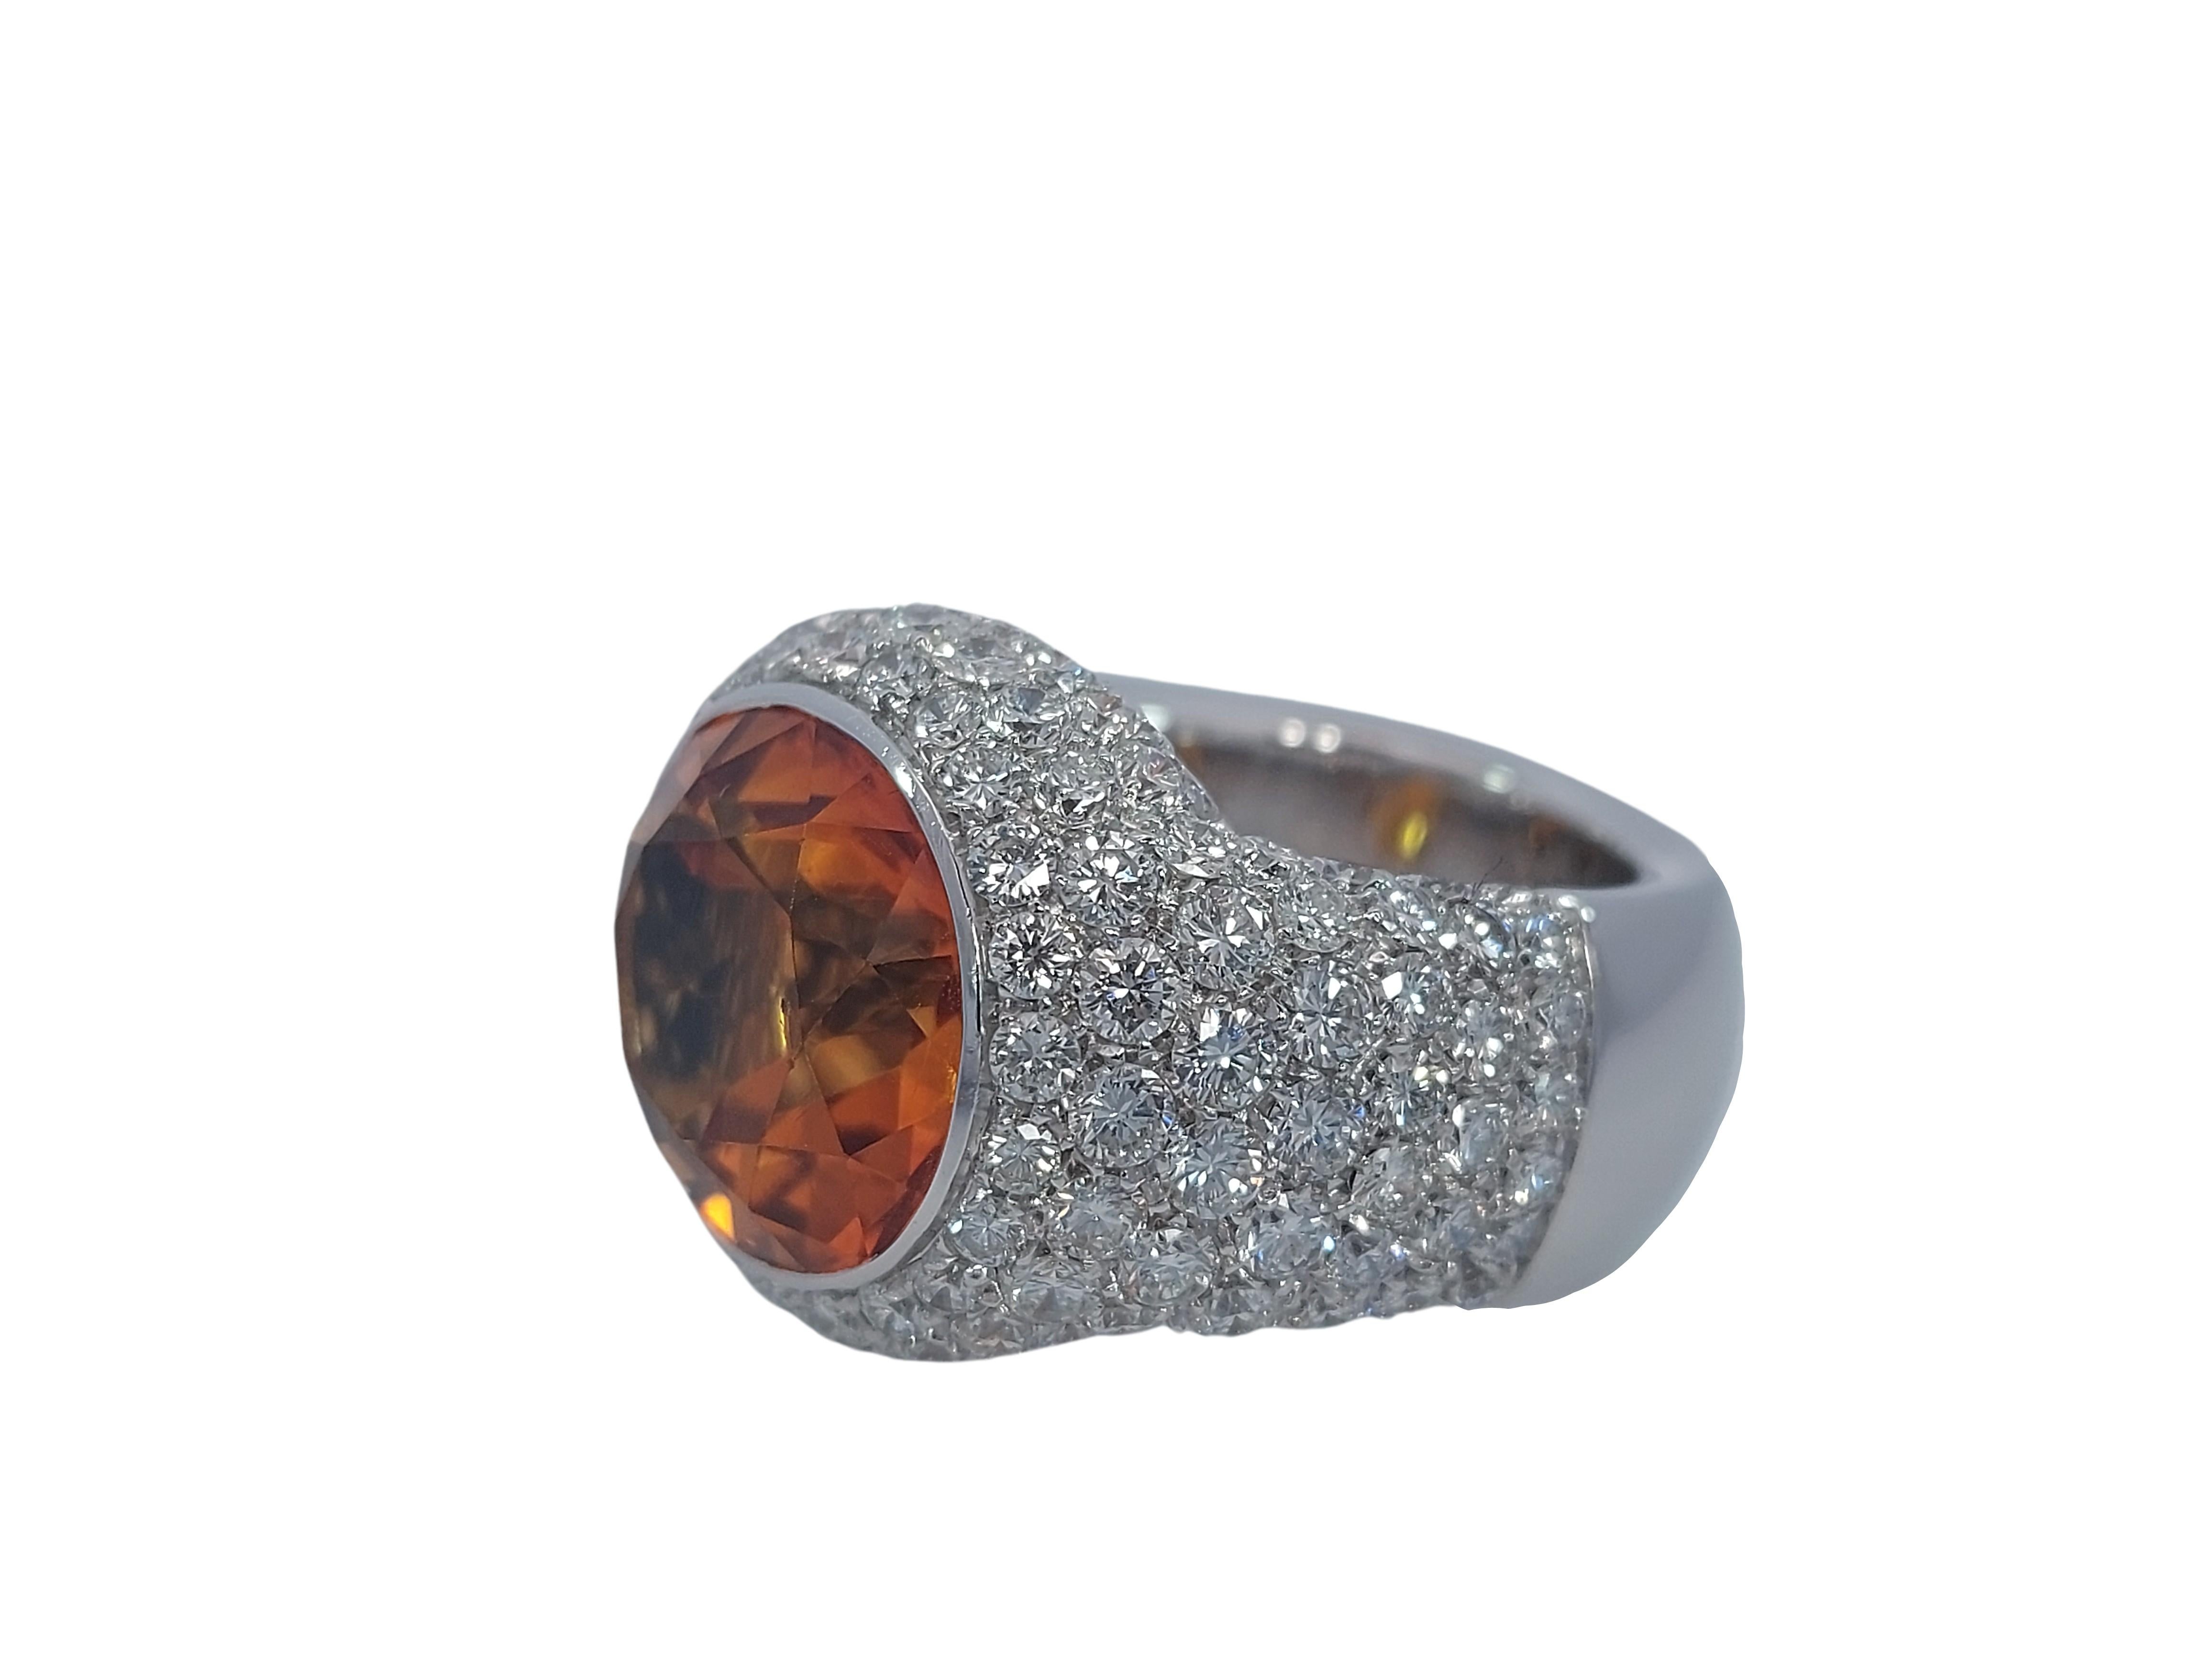 Stunning 18kt Solid White Gold Ring with 6.4ct Diamonds and Big Citrine Stone For Sale 4